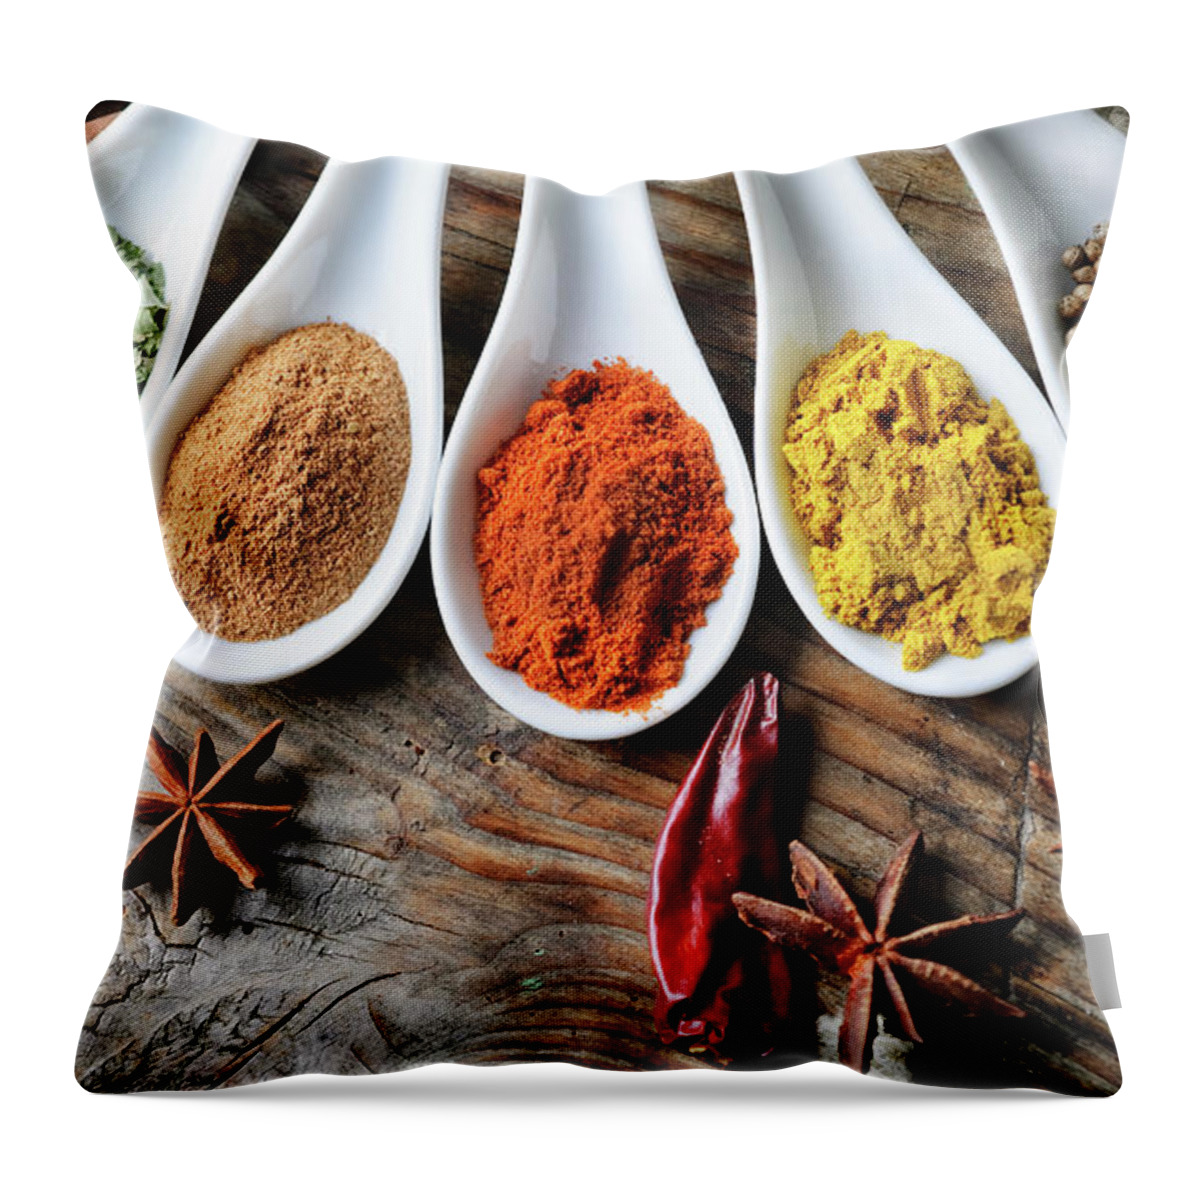 Spices Throw Pillow featuring the photograph Spices by Jelena Jovanovic